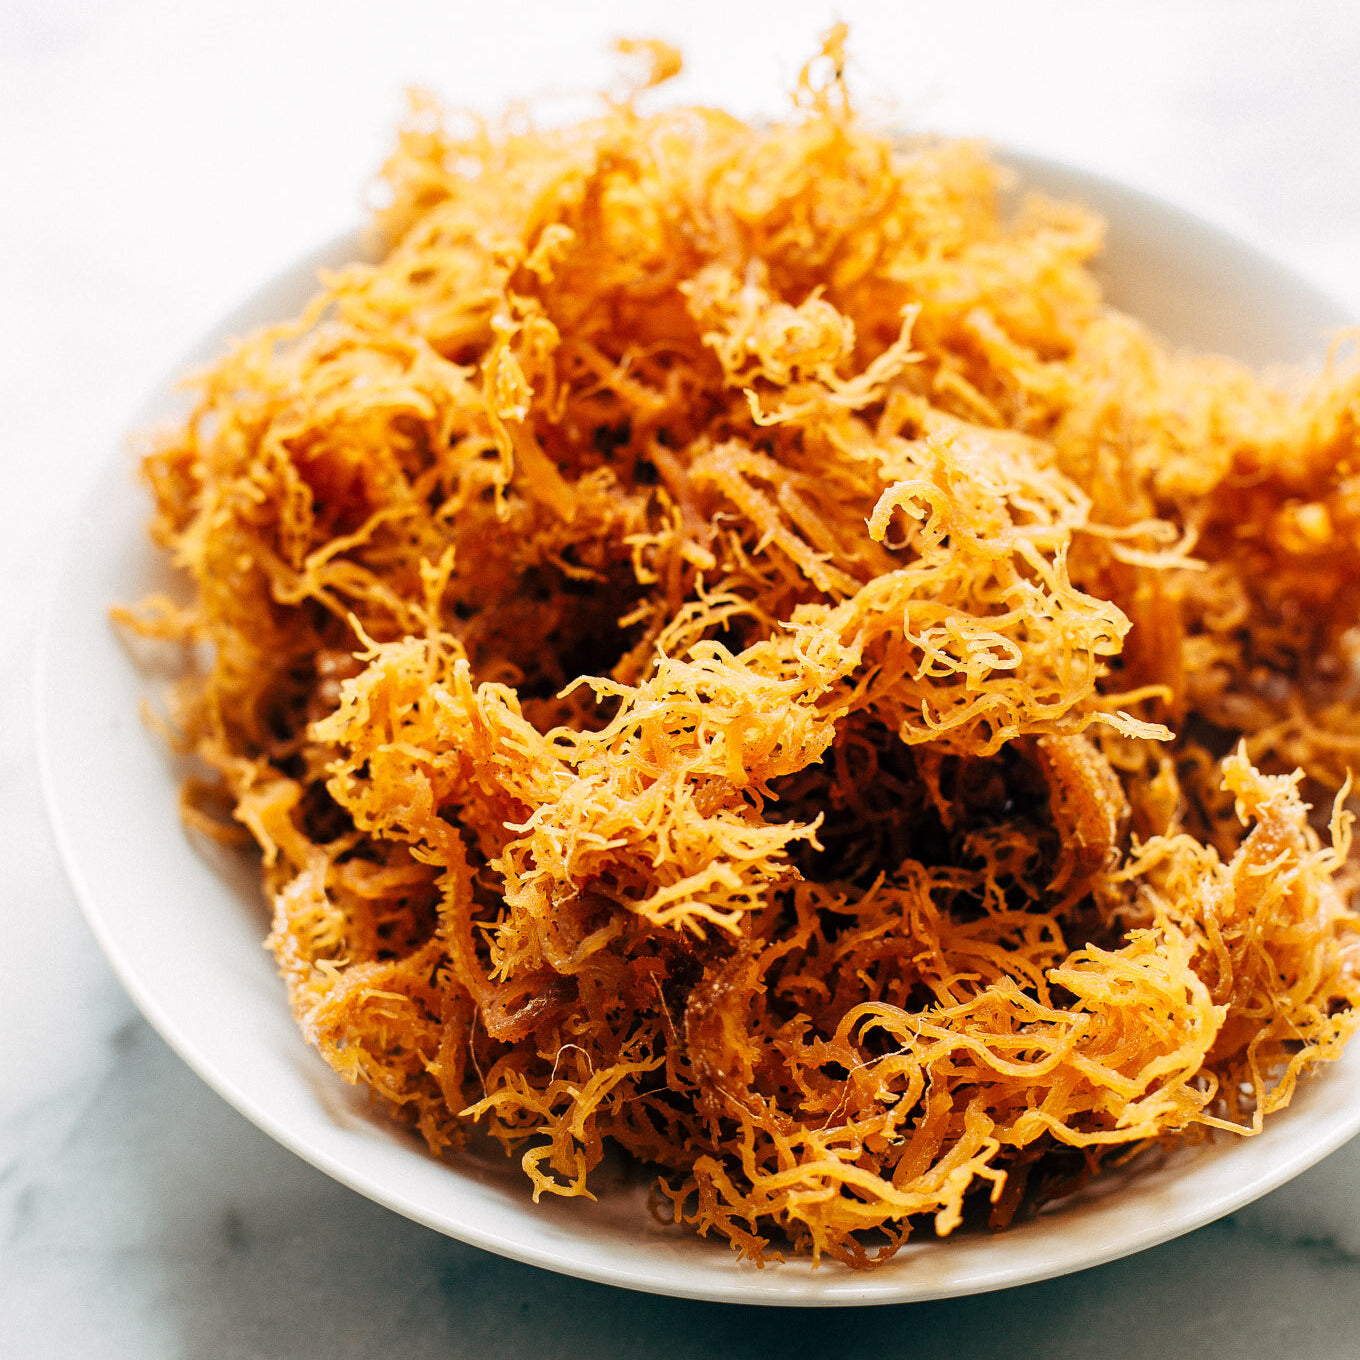 Sea Moss: The Superfood You Need!